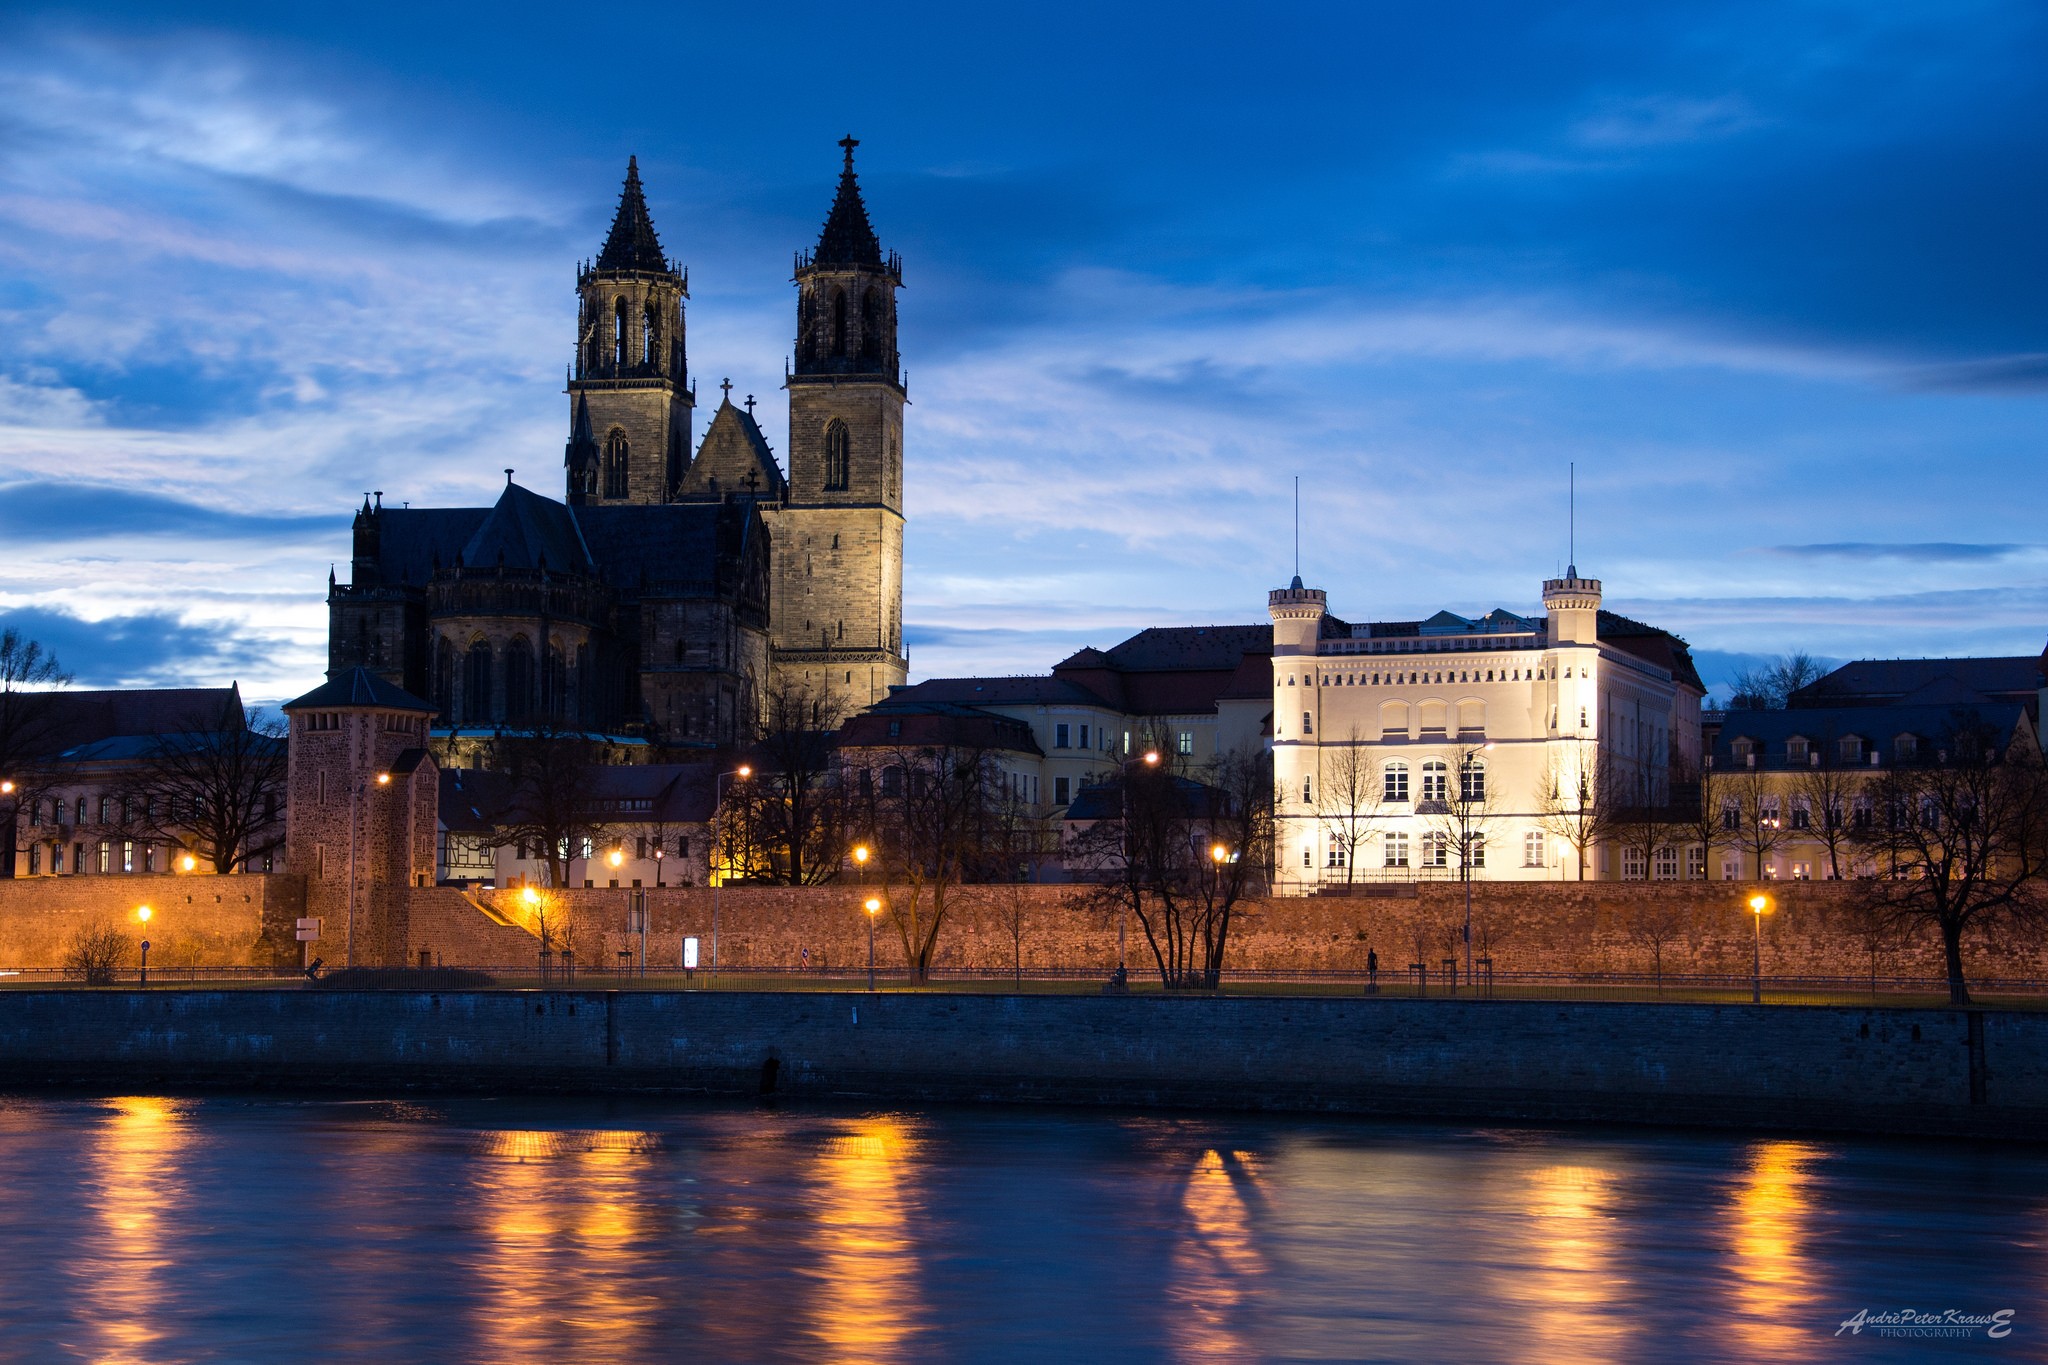 General 2048x1365 architecture cityscape building old building castle clouds lights Germany cathedral evening river reflection Magdeburg watermarked